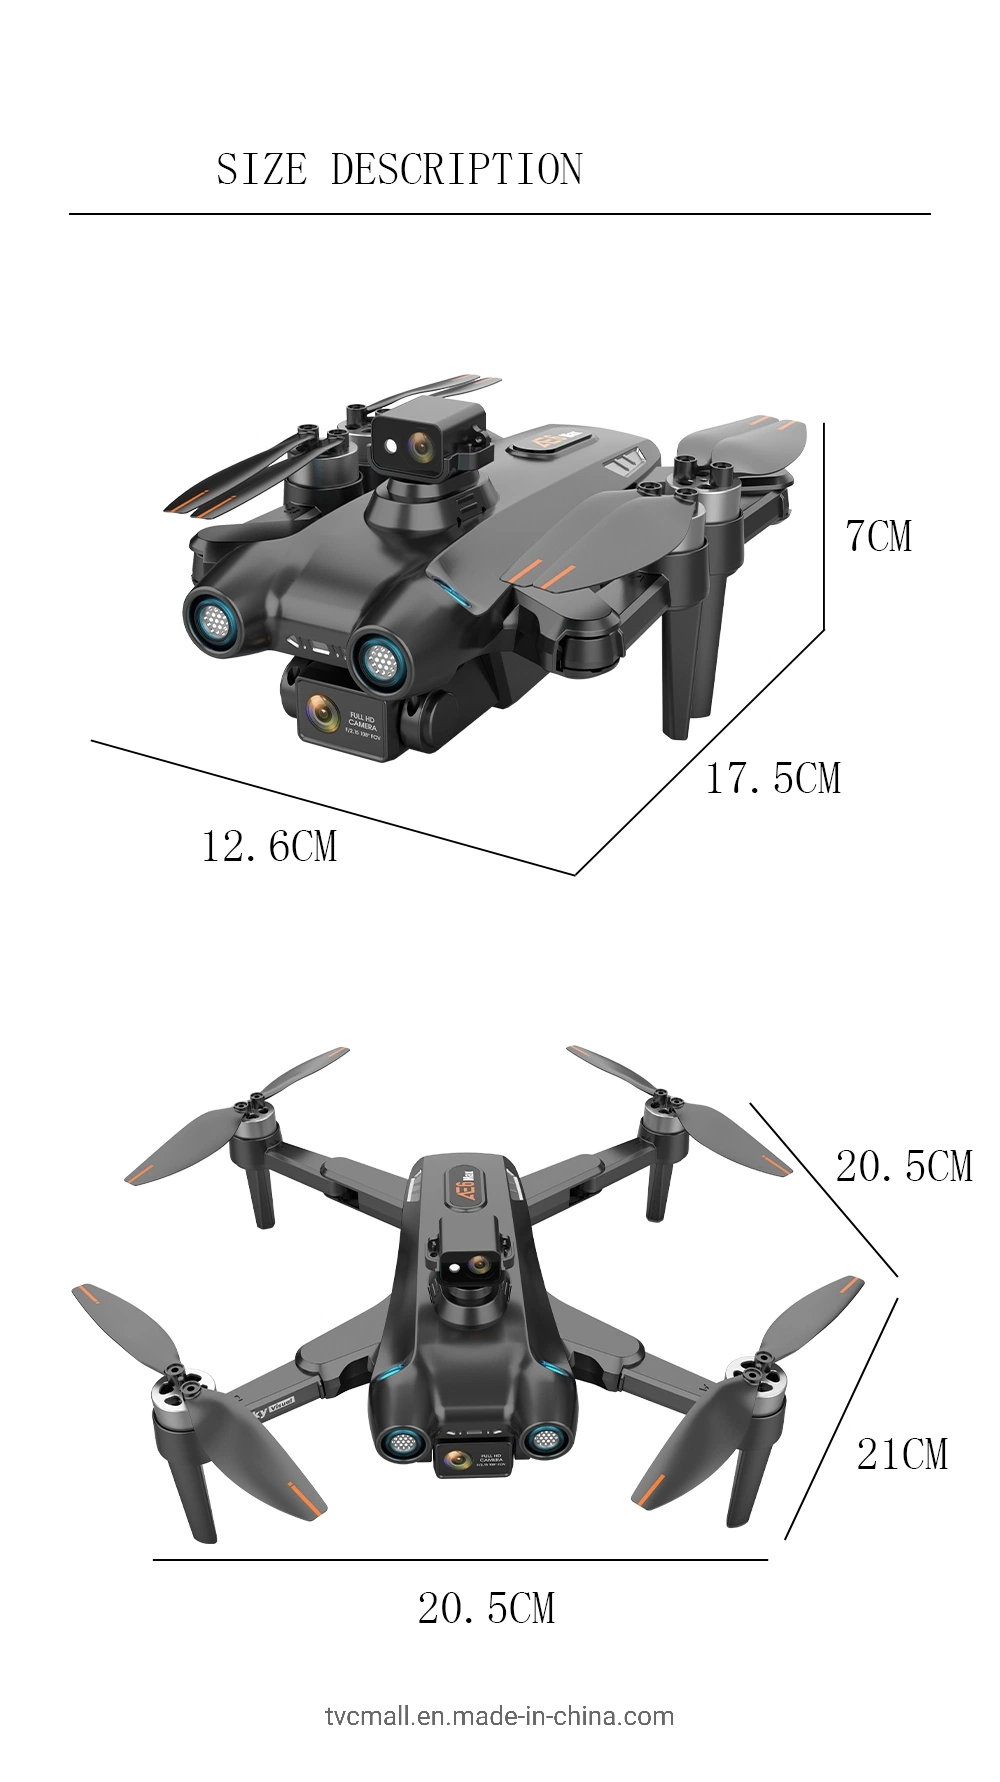 Ae6 Max 360-Degree Obstacle Avoidance RC Quadcopter Brushless 4-Axis HD Dual-Lens Foldable RC Drone with Remote Control - Grey